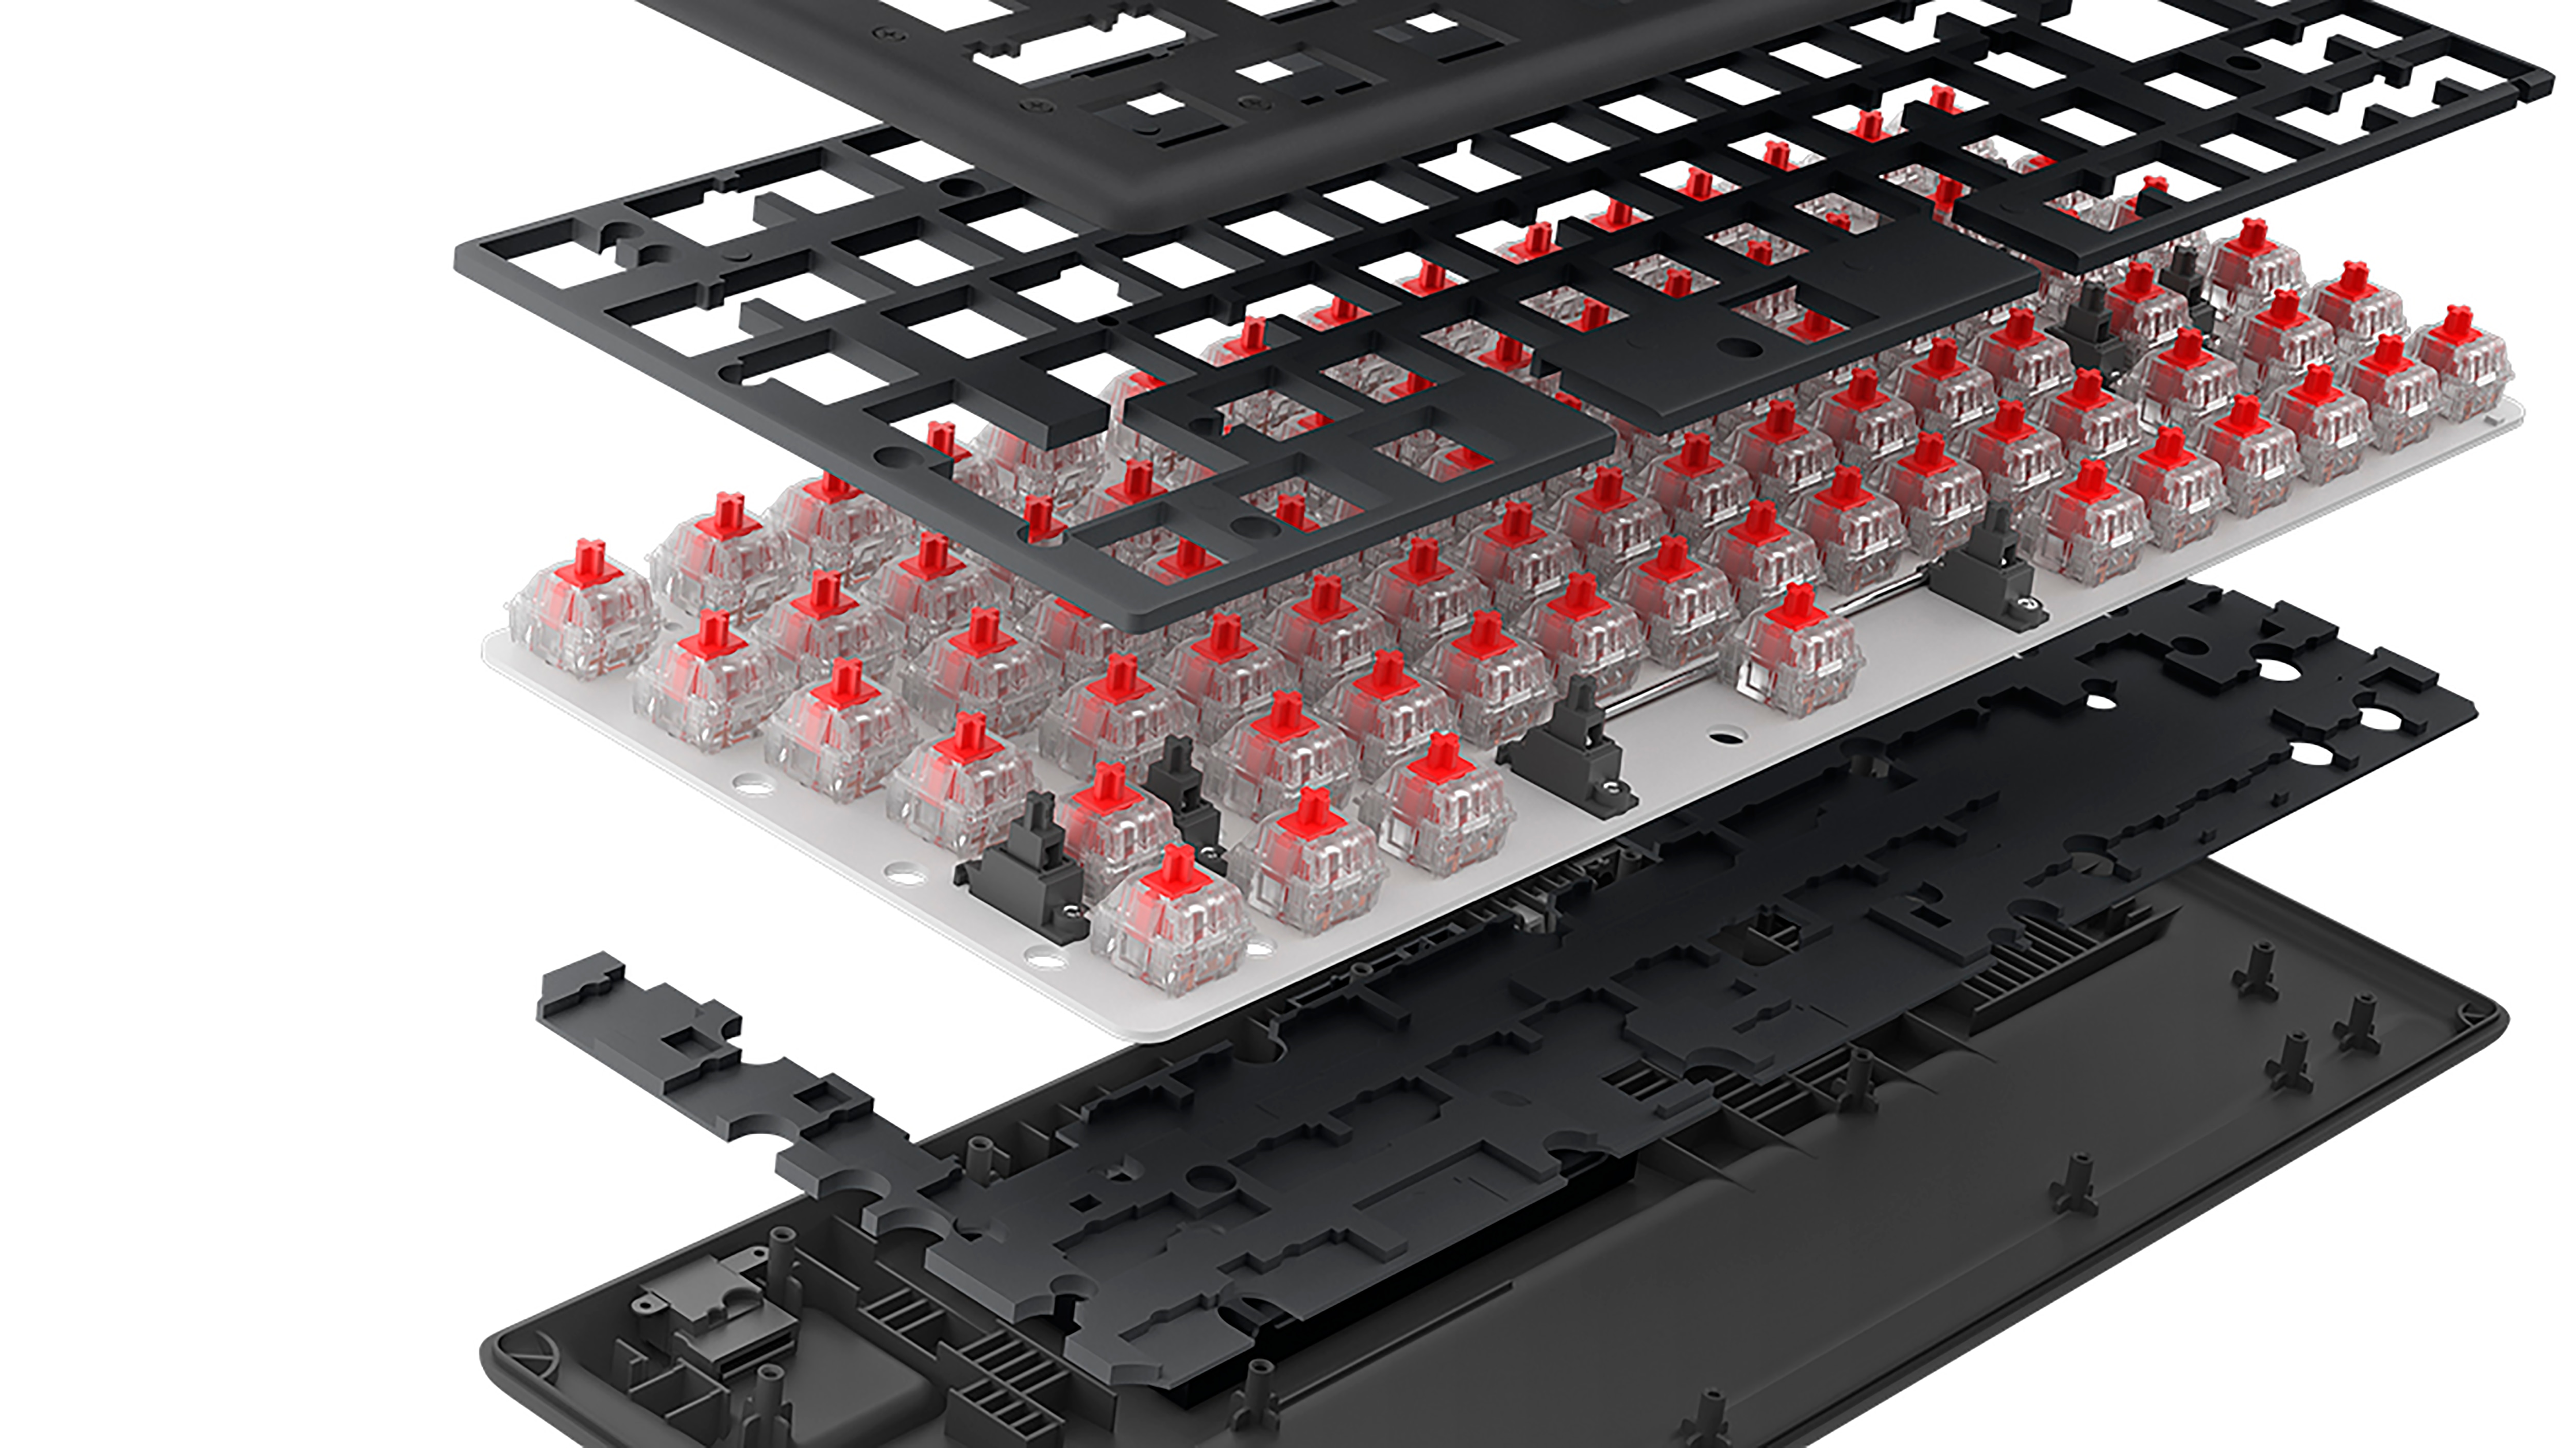 Dell Alienware Pro Wireless Gaming Keyboard dismantled. 